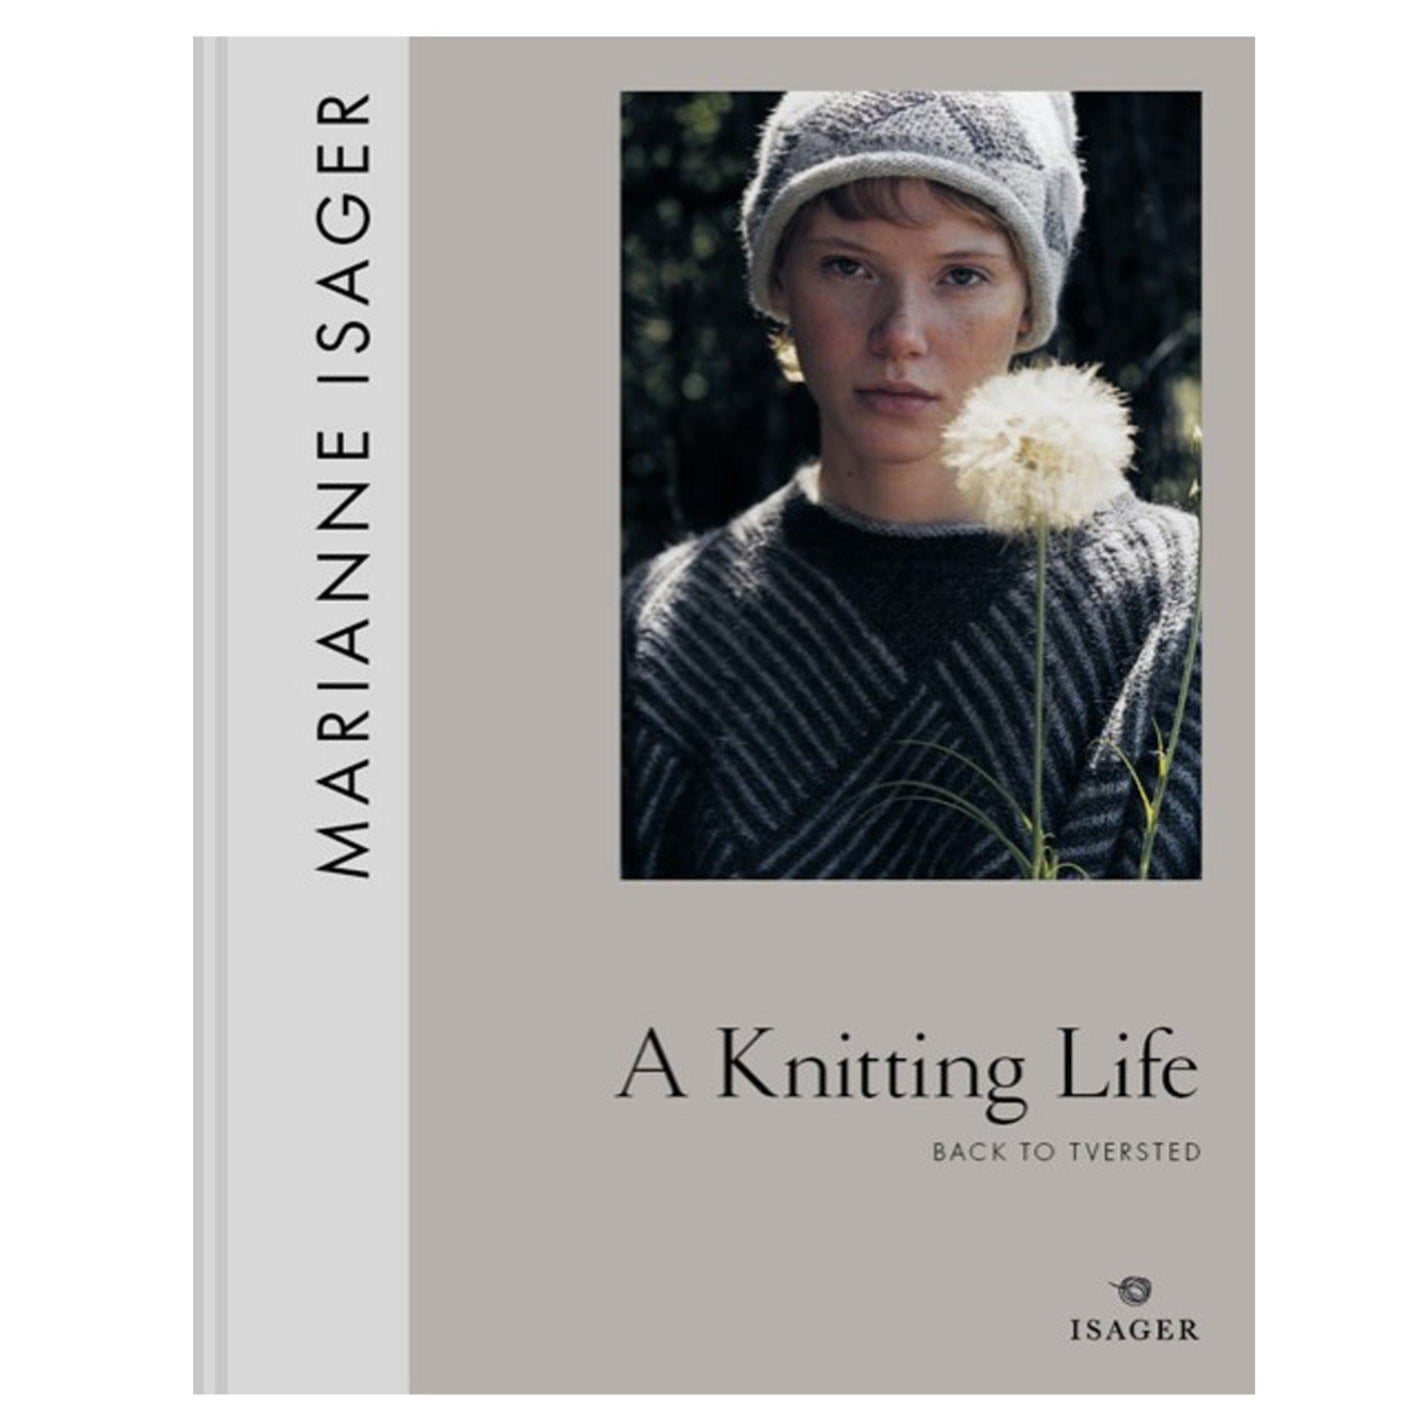 A Knitting Life  - Back to Tversted by Isager Isager